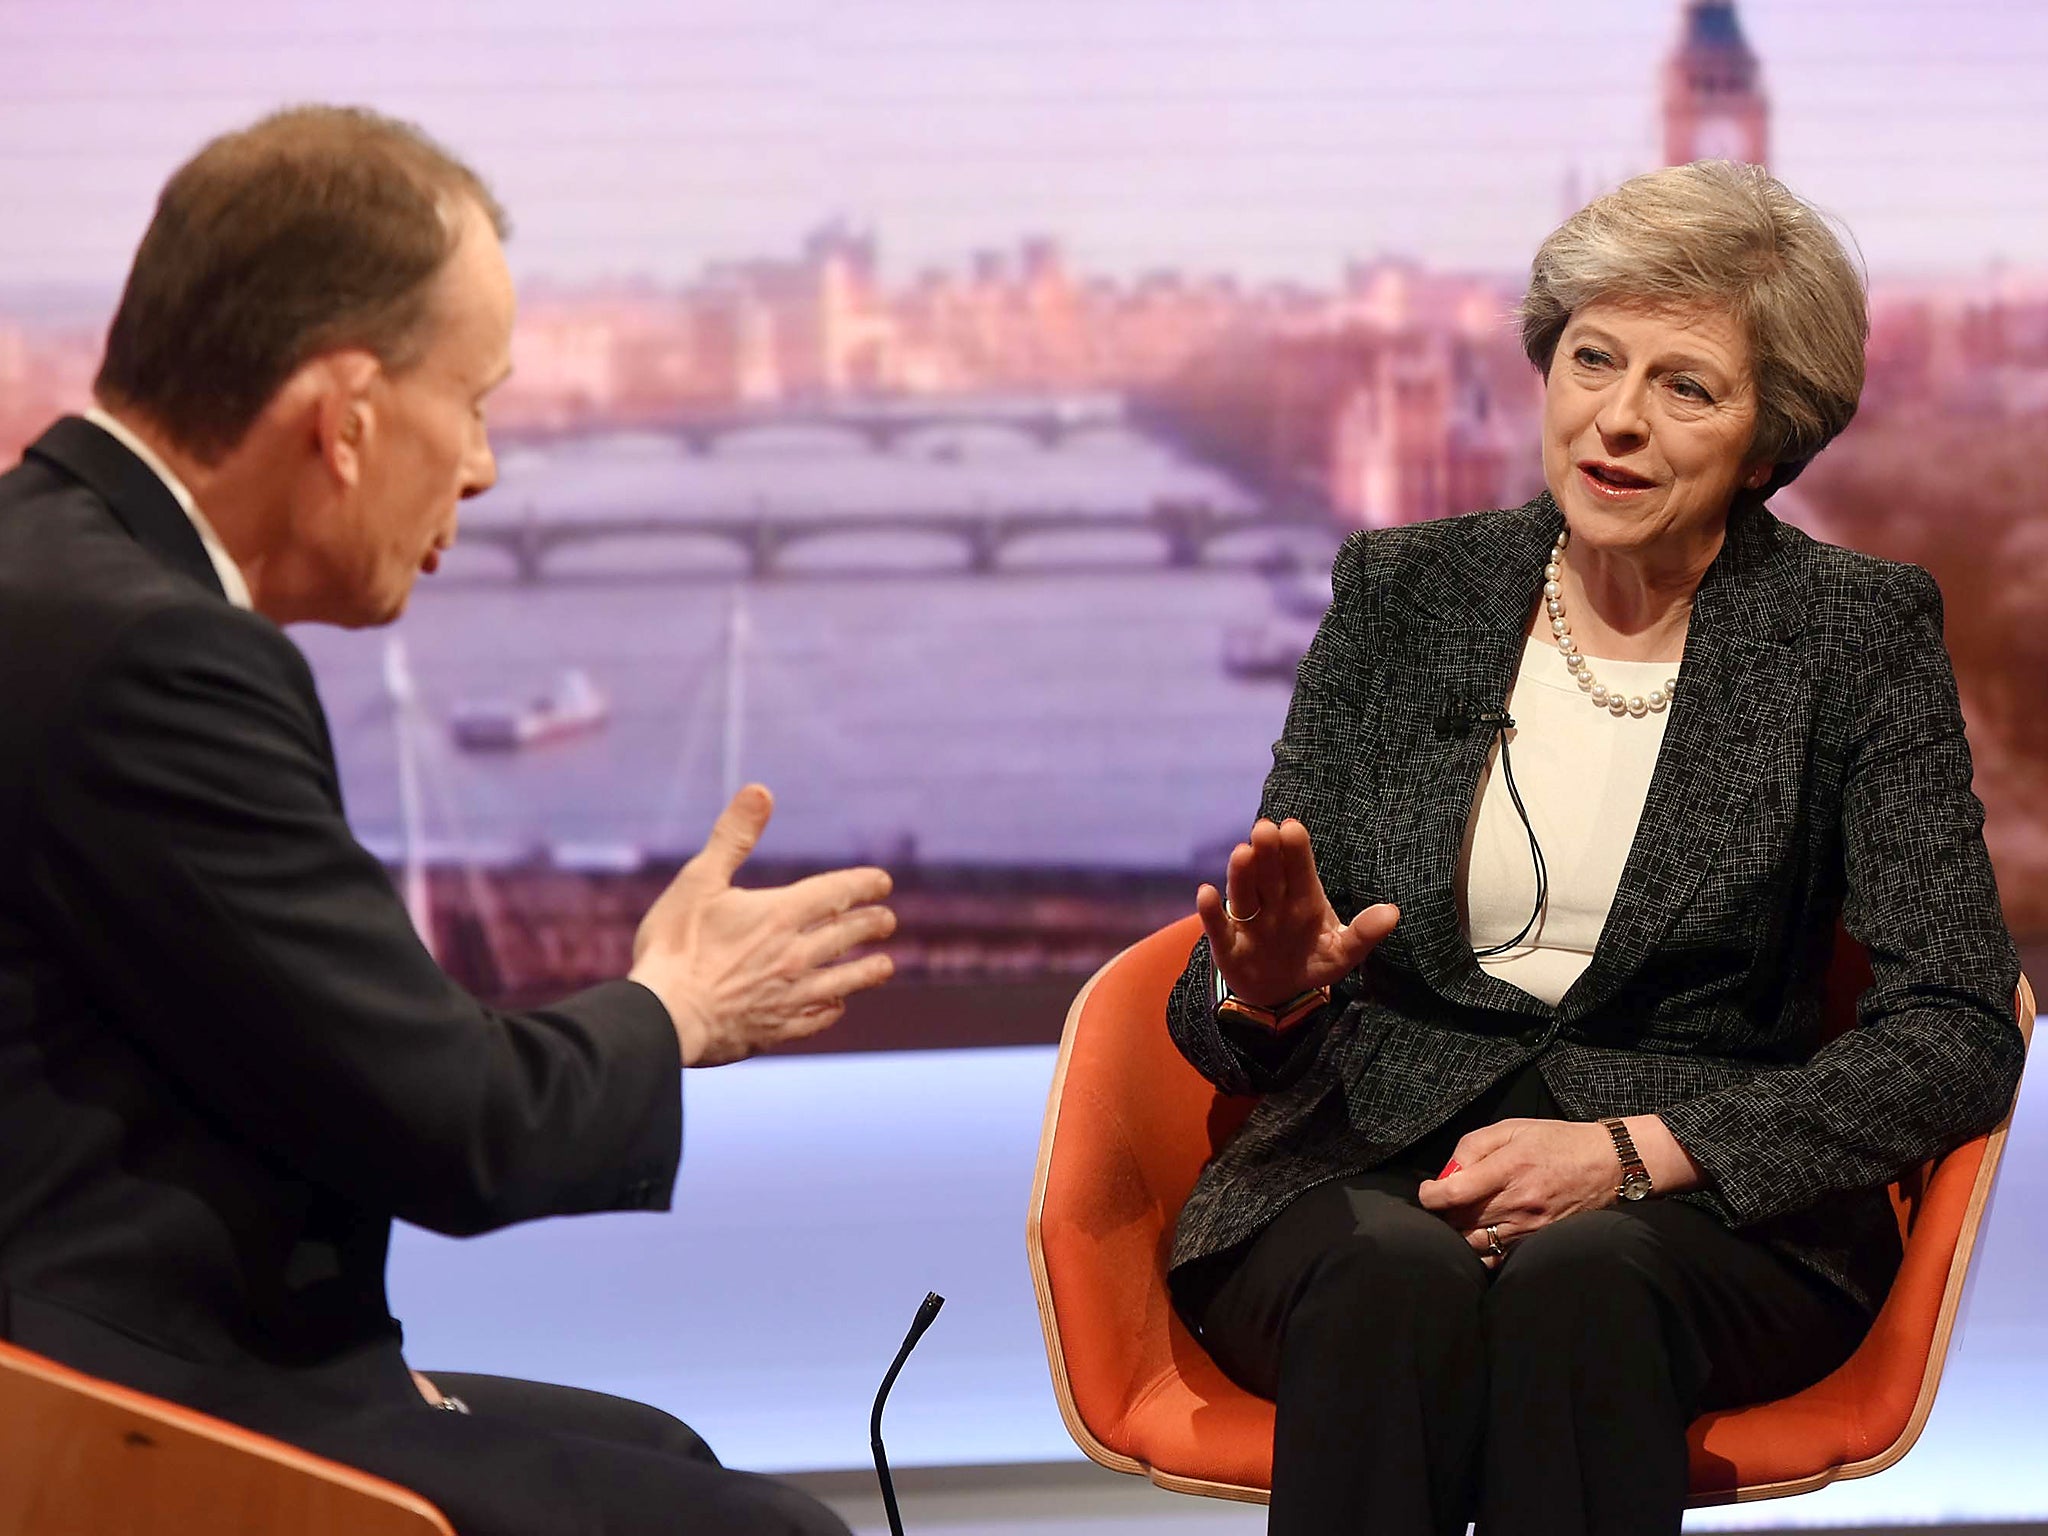 Theresa May spoke to Andrew Marr about her meeting with Trump next Friday